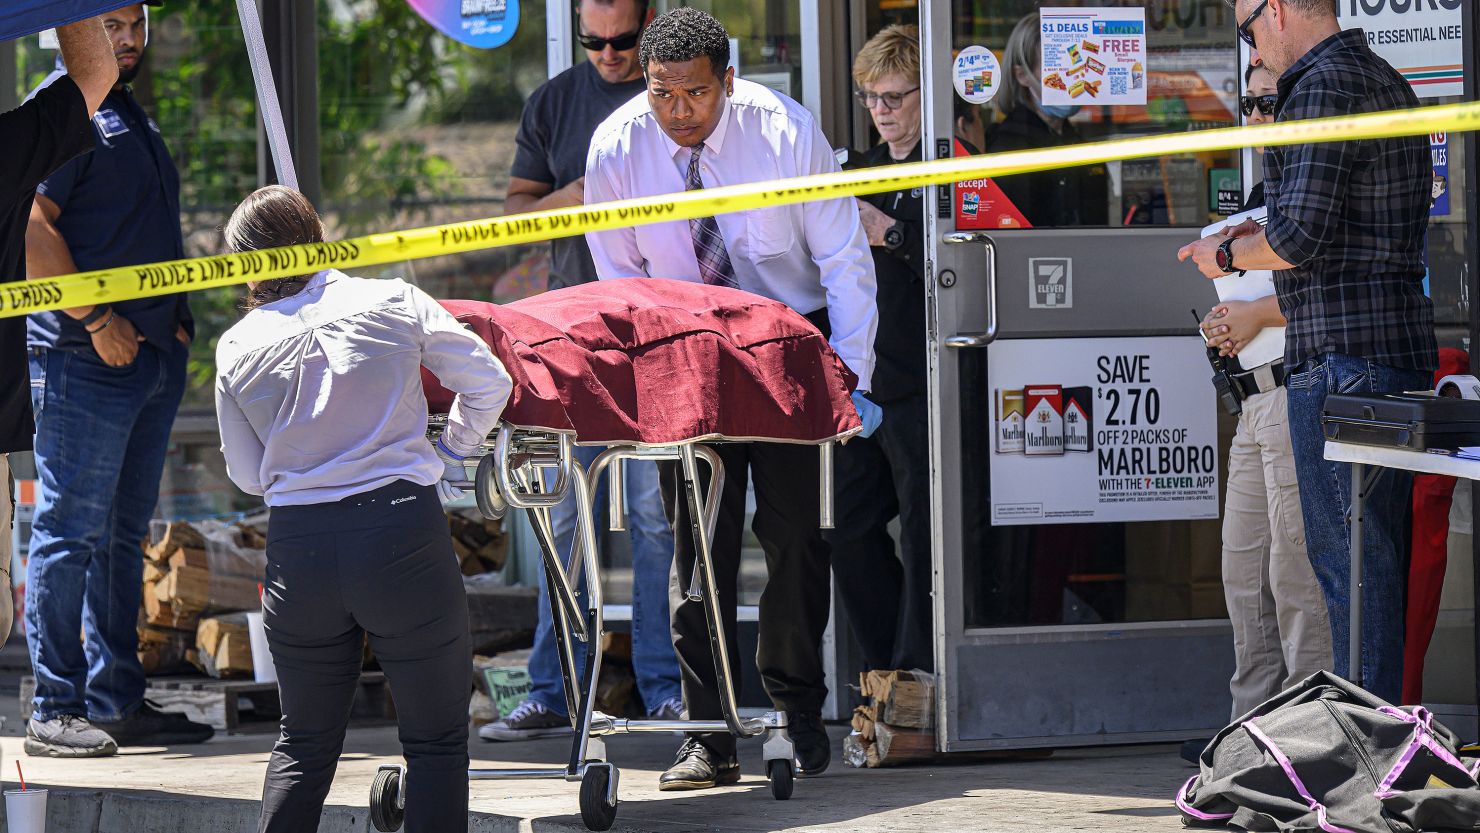 A body is removed from a Brea, California, 7-Eleven after a clerk was fatally shot on July 11.